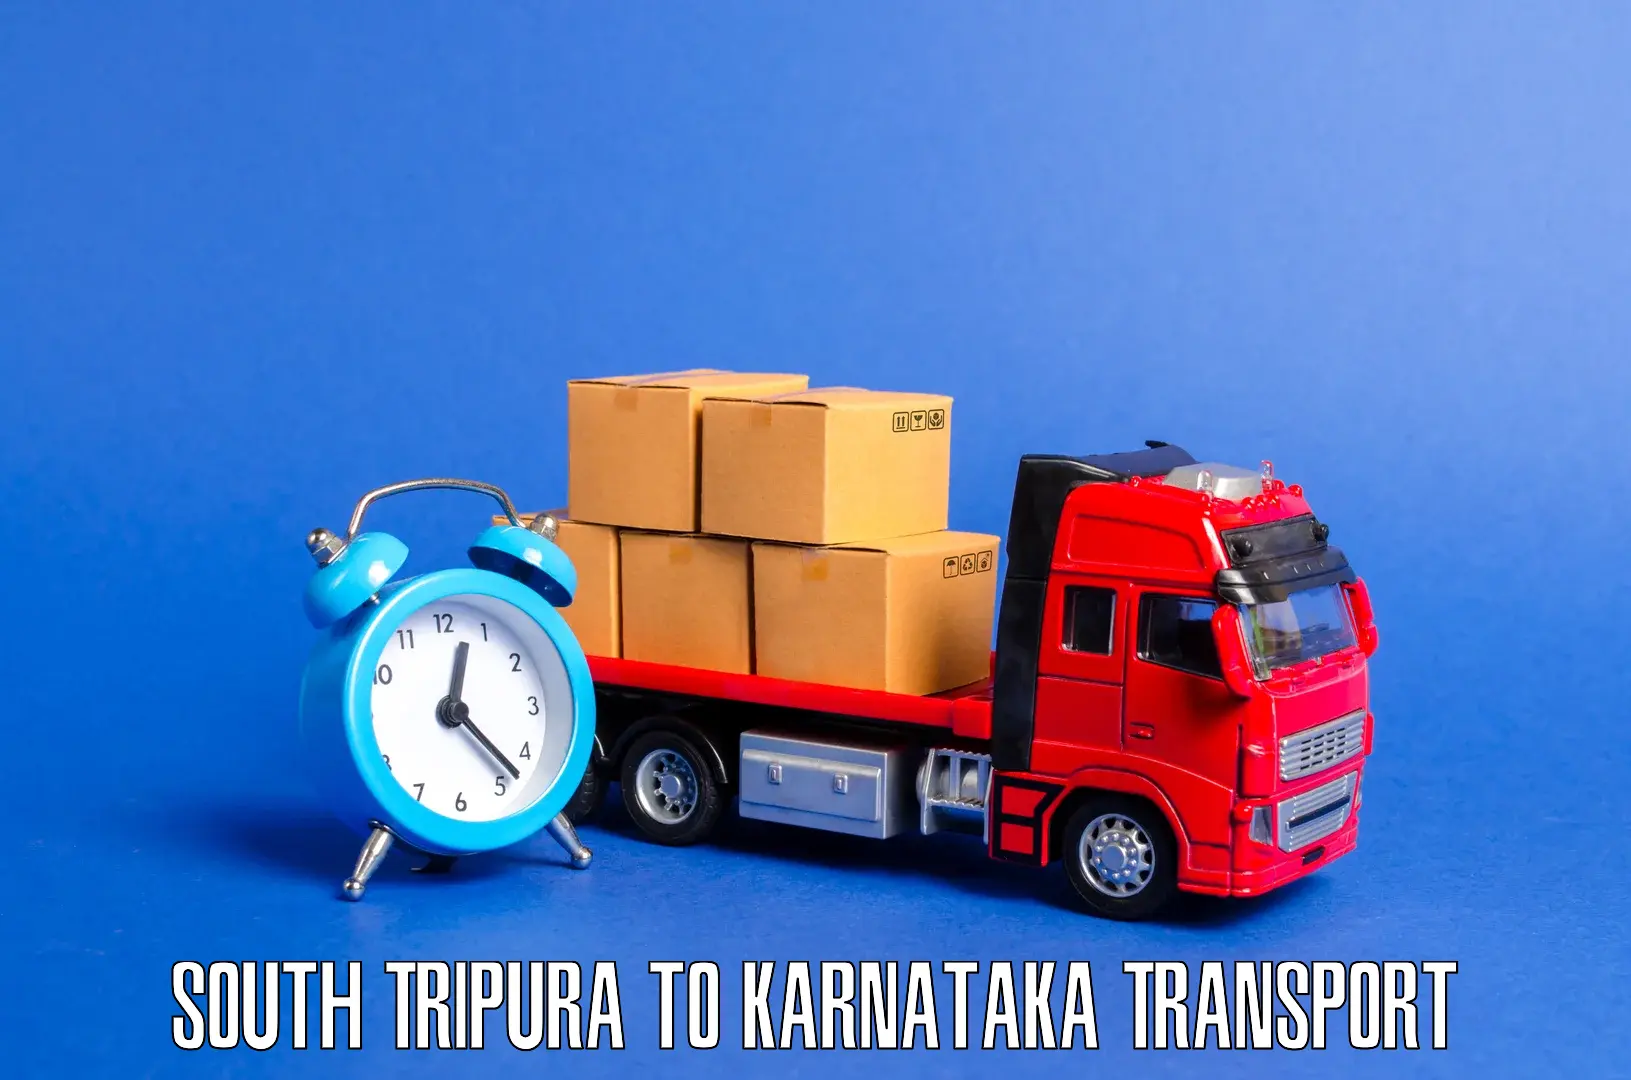 Daily parcel service transport in South Tripura to Channagiri